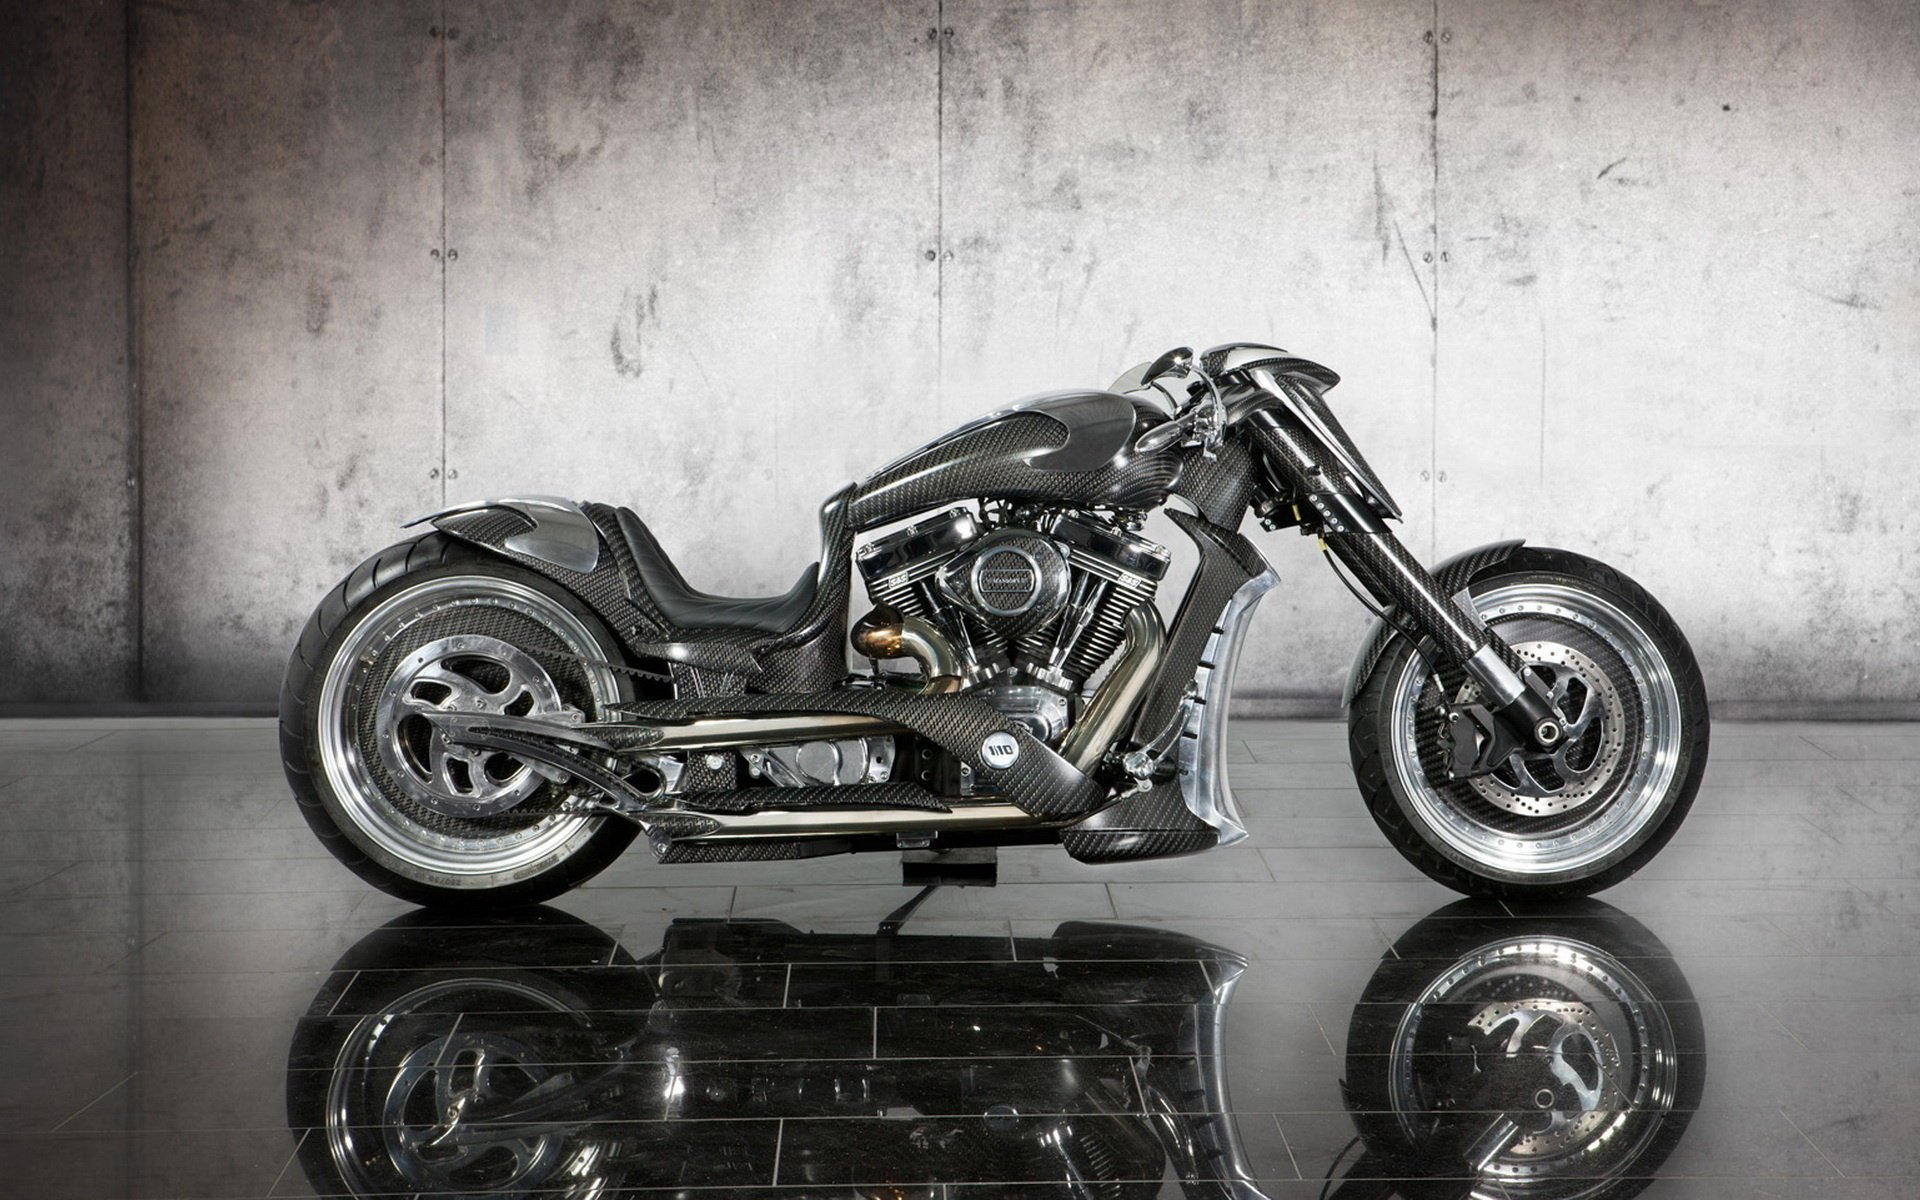 Beautiful motorcycle on a mirrored floor